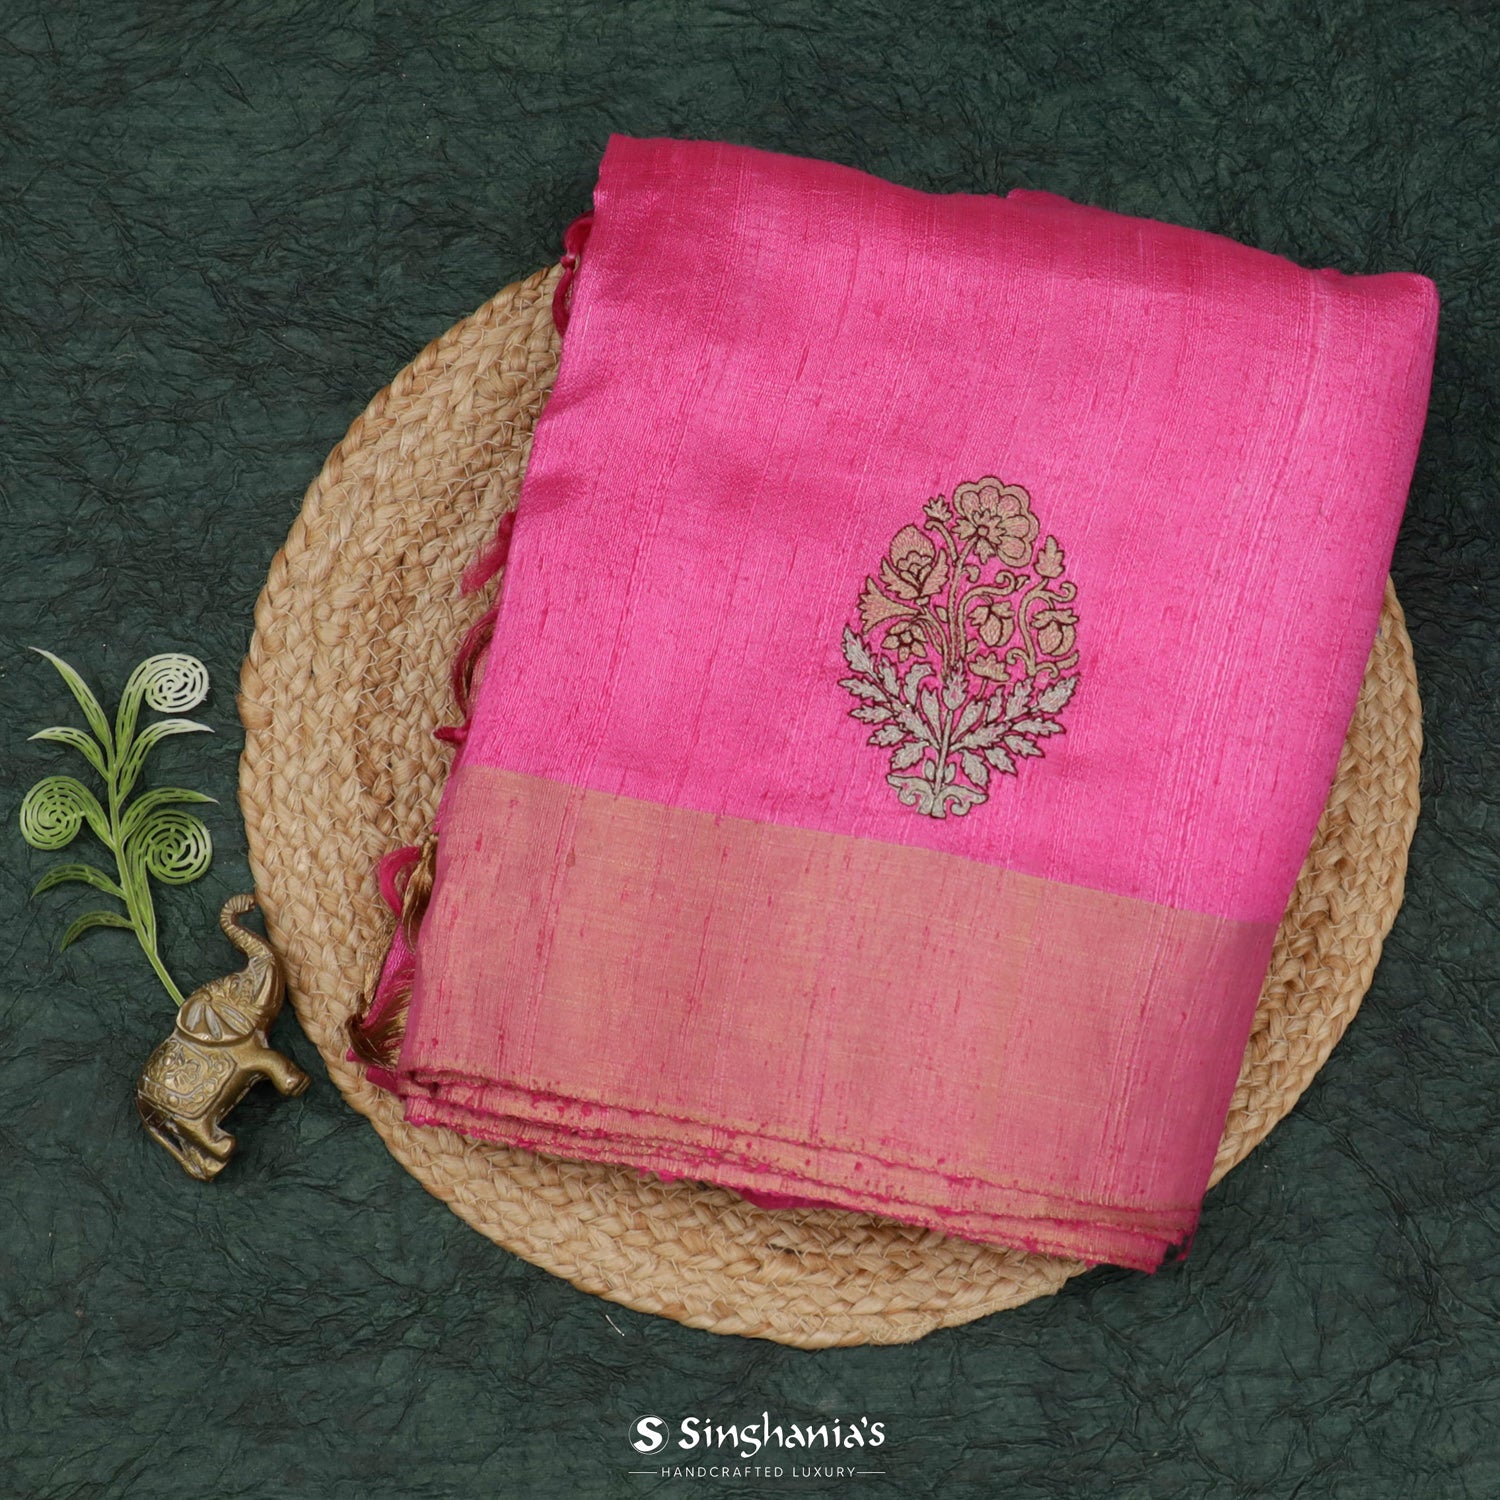 Hot Pink Dupion Saree With Thread Embroidery